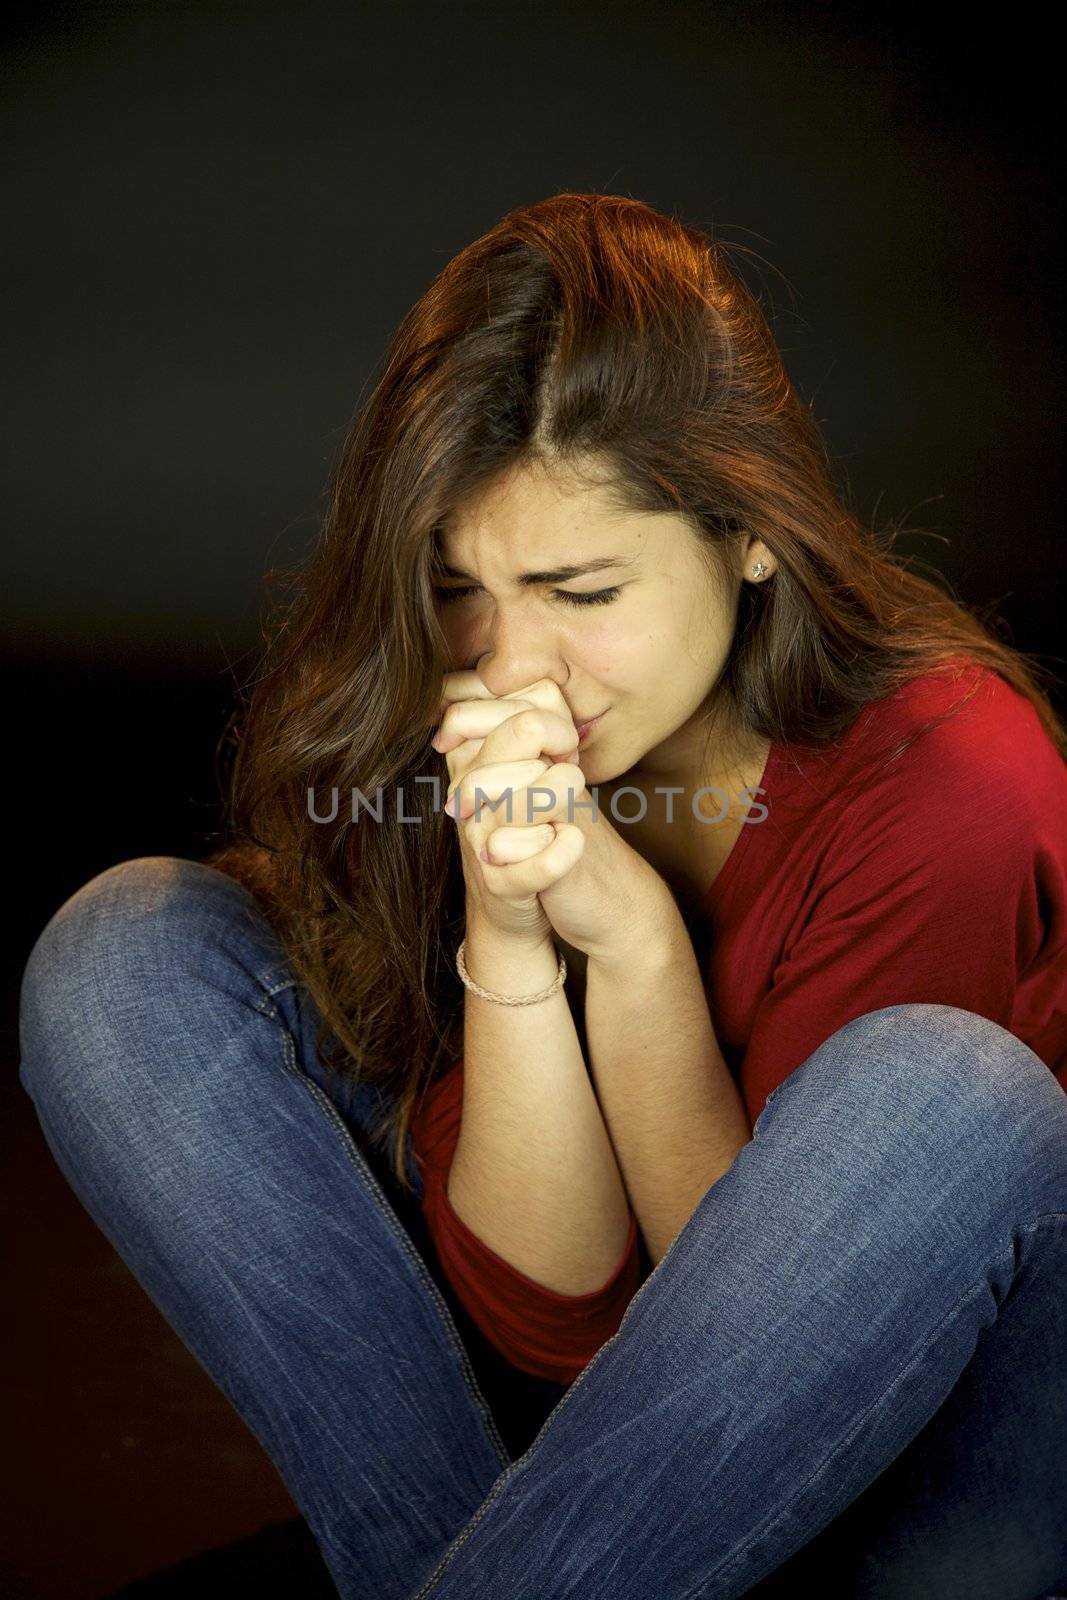 Scared young woman crying and praying